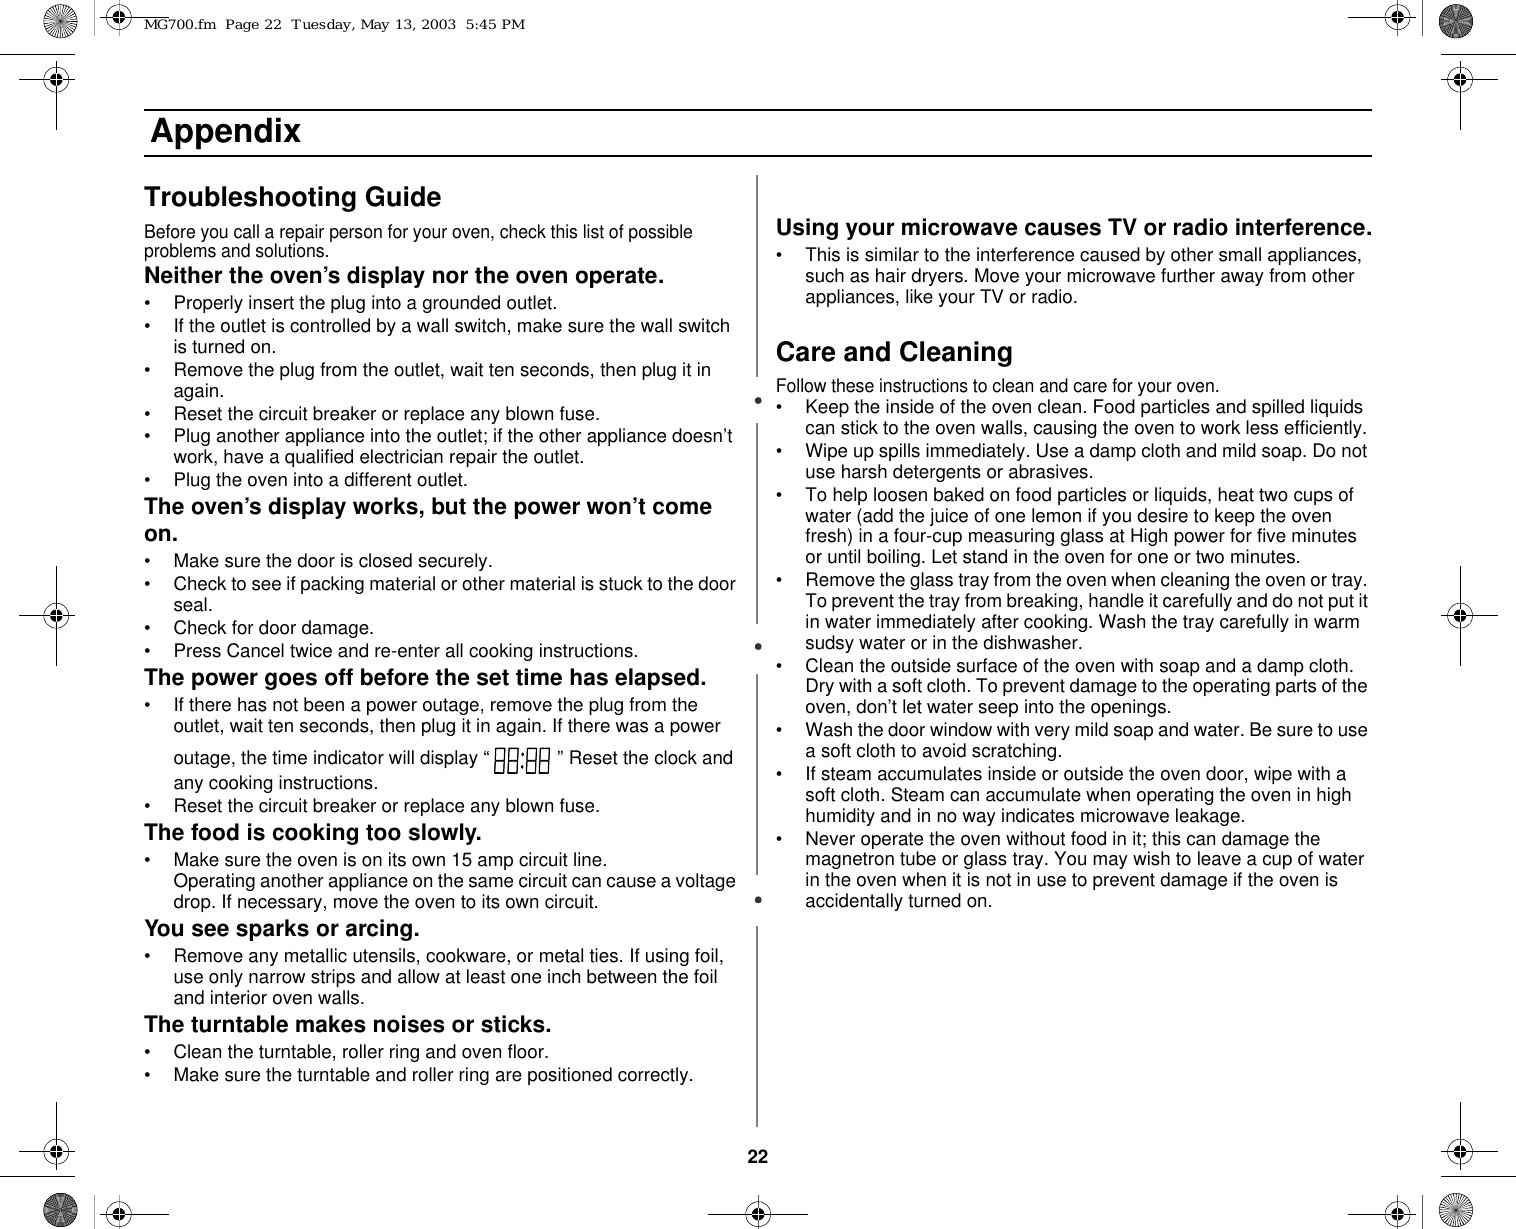 22 AppendixTroubleshooting GuideBefore you call a repair person for your oven, check this list of possible problems and solutions.Neither the oven’s display nor the oven operate.• Properly insert the plug into a grounded outlet. • If the outlet is controlled by a wall switch, make sure the wall switch is turned on. • Remove the plug from the outlet, wait ten seconds, then plug it in again. • Reset the circuit breaker or replace any blown fuse.• Plug another appliance into the outlet; if the other appliance doesn’t work, have a qualified electrician repair the outlet. • Plug the oven into a different outlet.The oven’s display works, but the power won’t come on.• Make sure the door is closed securely.• Check to see if packing material or other material is stuck to the door seal. • Check for door damage.• Press Cancel twice and re-enter all cooking instructions.The power goes off before the set time has elapsed.• If there has not been a power outage, remove the plug from the outlet, wait ten seconds, then plug it in again. If there was a power outage, the time indicator will display “  ” Reset the clock and any cooking instructions. • Reset the circuit breaker or replace any blown fuse. The food is cooking too slowly.• Make sure the oven is on its own 15 amp circuit line. Operating another appliance on the same circuit can cause a voltage drop. If necessary, move the oven to its own circuit.You see sparks or arcing.• Remove any metallic utensils, cookware, or metal ties. If using foil, use only narrow strips and allow at least one inch between the foil and interior oven walls.The turntable makes noises or sticks.• Clean the turntable, roller ring and oven floor. • Make sure the turntable and roller ring are positioned correctly.Using your microwave causes TV or radio interference.• This is similar to the interference caused by other small appliances, such as hair dryers. Move your microwave further away from other appliances, like your TV or radio.Care and CleaningFollow these instructions to clean and care for your oven.• Keep the inside of the oven clean. Food particles and spilled liquids can stick to the oven walls, causing the oven to work less efficiently.• Wipe up spills immediately. Use a damp cloth and mild soap. Do not use harsh detergents or abrasives. • To help loosen baked on food particles or liquids, heat two cups of water (add the juice of one lemon if you desire to keep the oven fresh) in a four-cup measuring glass at High power for five minutes or until boiling. Let stand in the oven for one or two minutes. • Remove the glass tray from the oven when cleaning the oven or tray. To prevent the tray from breaking, handle it carefully and do not put it in water immediately after cooking. Wash the tray carefully in warm sudsy water or in the dishwasher. • Clean the outside surface of the oven with soap and a damp cloth. Dry with a soft cloth. To prevent damage to the operating parts of the oven, don’t let water seep into the openings.• Wash the door window with very mild soap and water. Be sure to use a soft cloth to avoid scratching.• If steam accumulates inside or outside the oven door, wipe with a soft cloth. Steam can accumulate when operating the oven in high humidity and in no way indicates microwave leakage.• Never operate the oven without food in it; this can damage the magnetron tube or glass tray. You may wish to leave a cup of water in the oven when it is not in use to prevent damage if the oven is accidentally turned on.MG700.fm  Page 22  Tuesday, May 13, 2003  5:45 PM